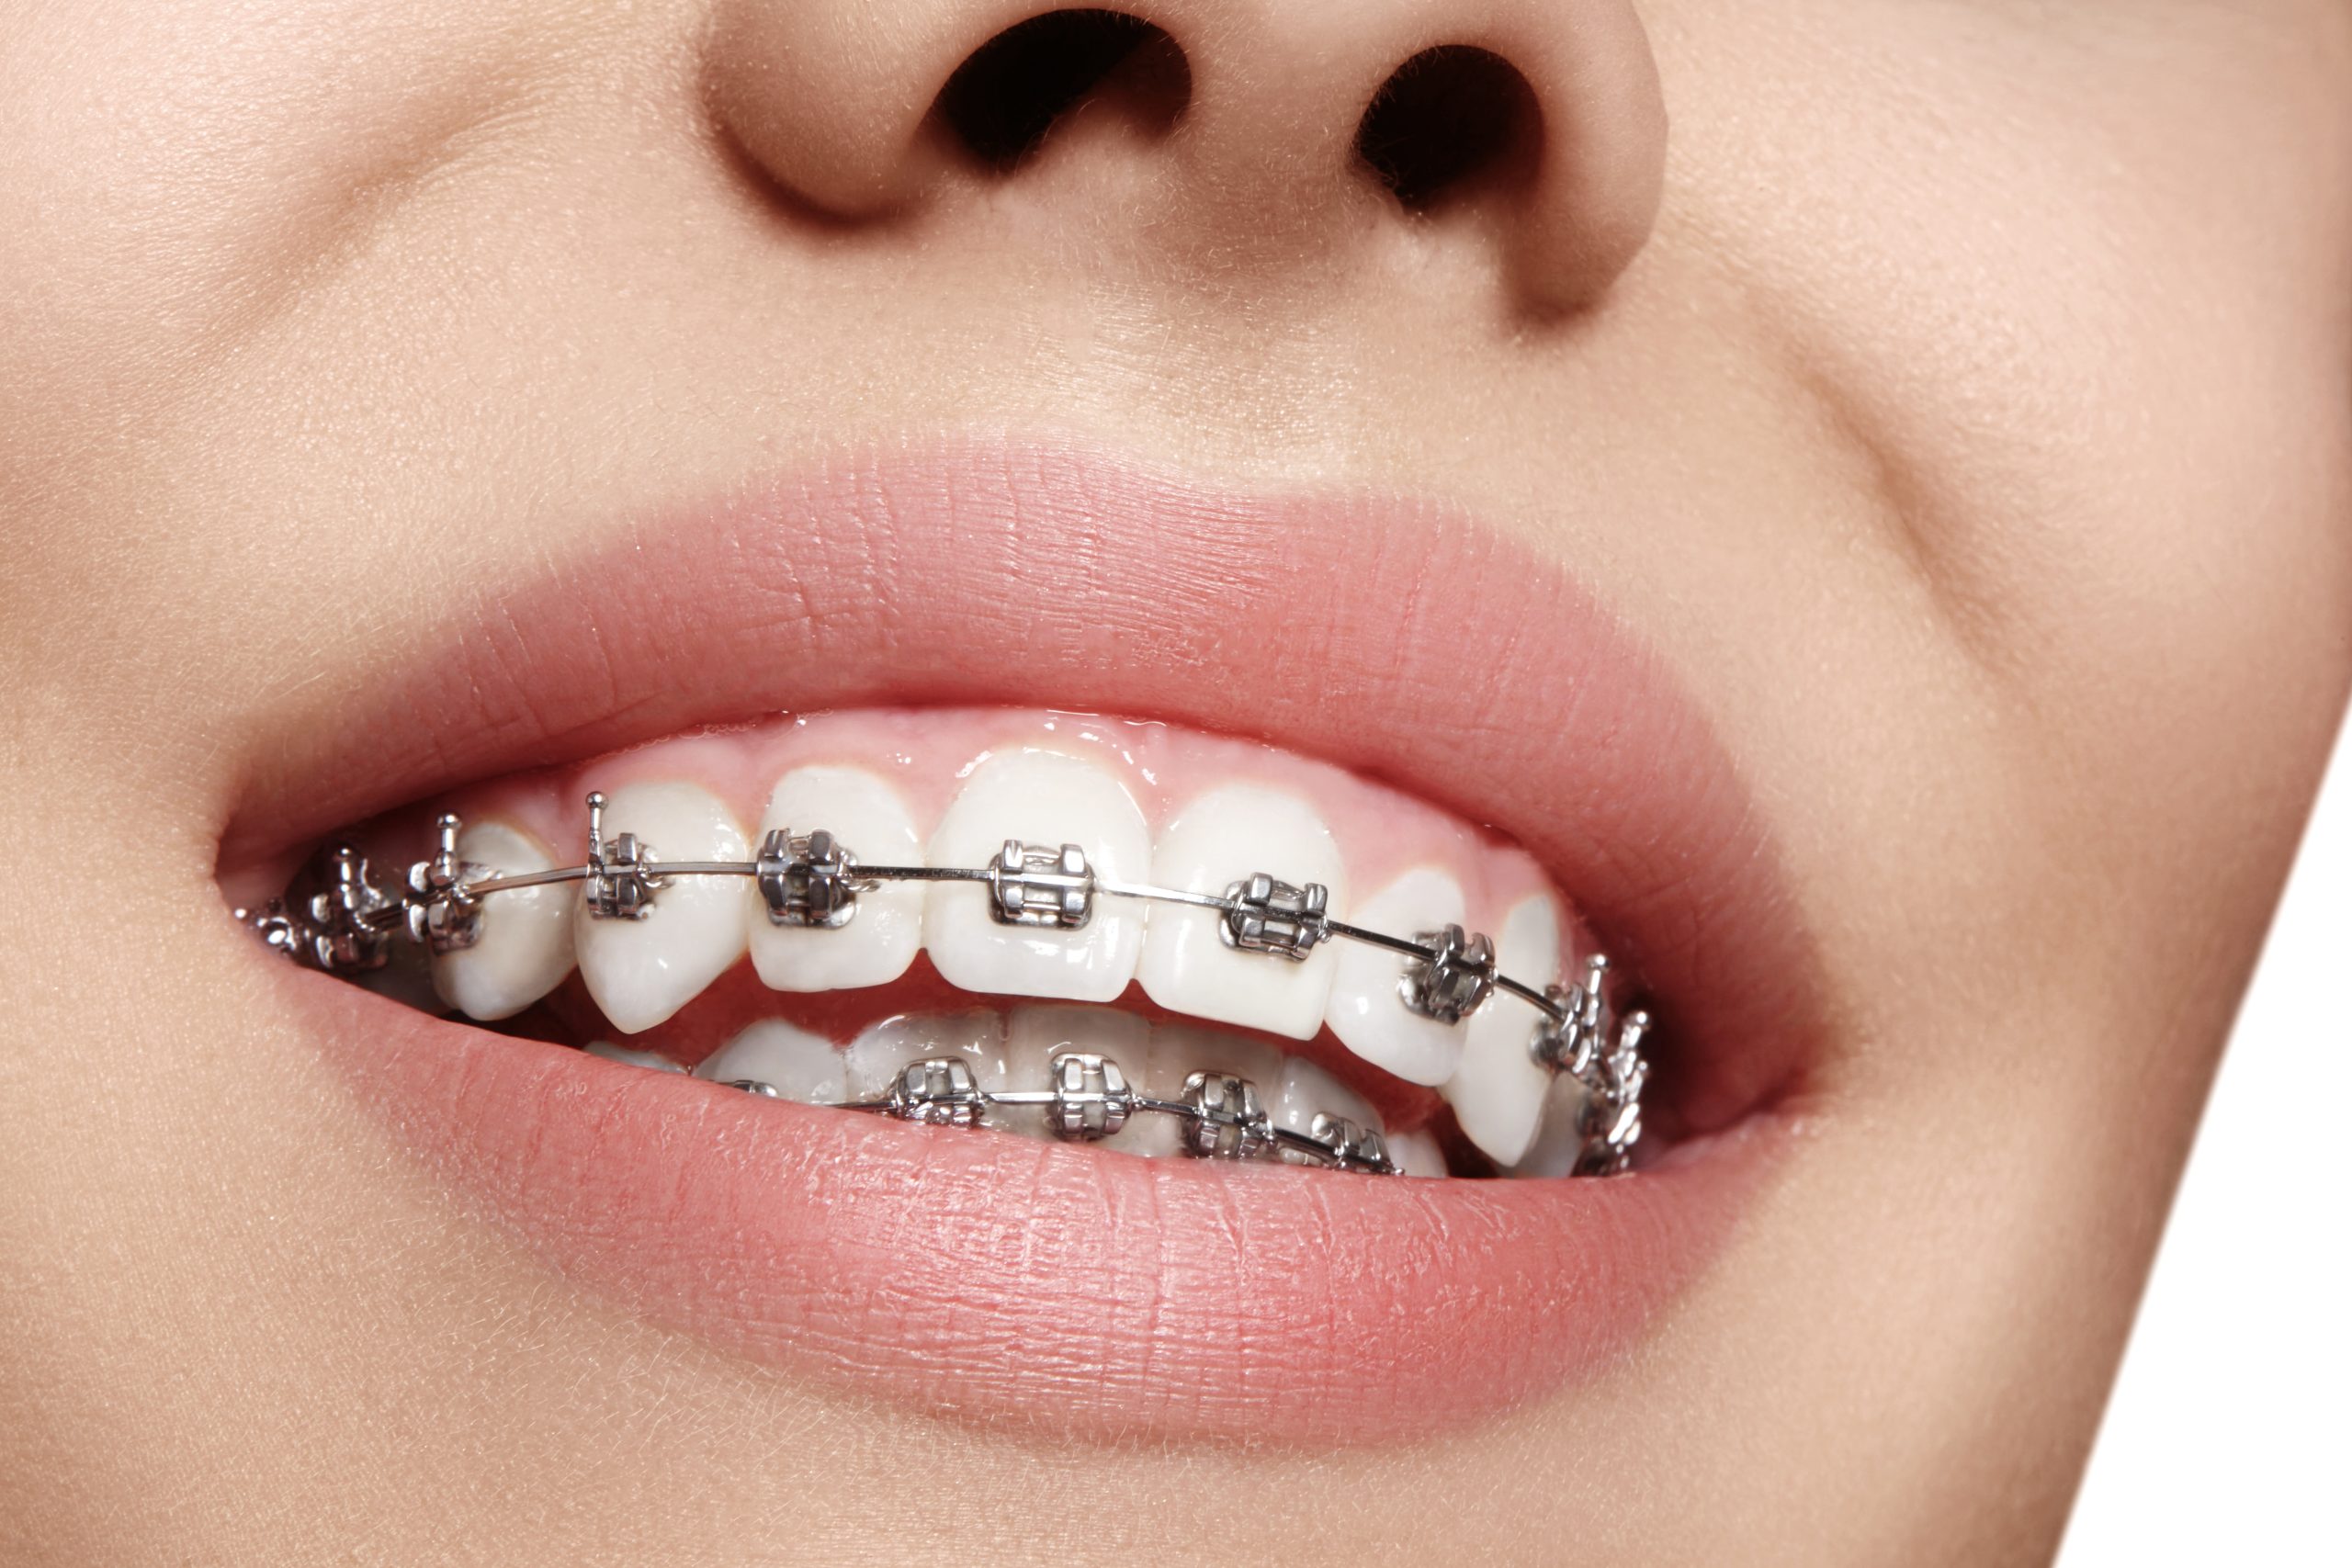 How Do Braces Work to Straighten Your Teeth & Types of Braces?